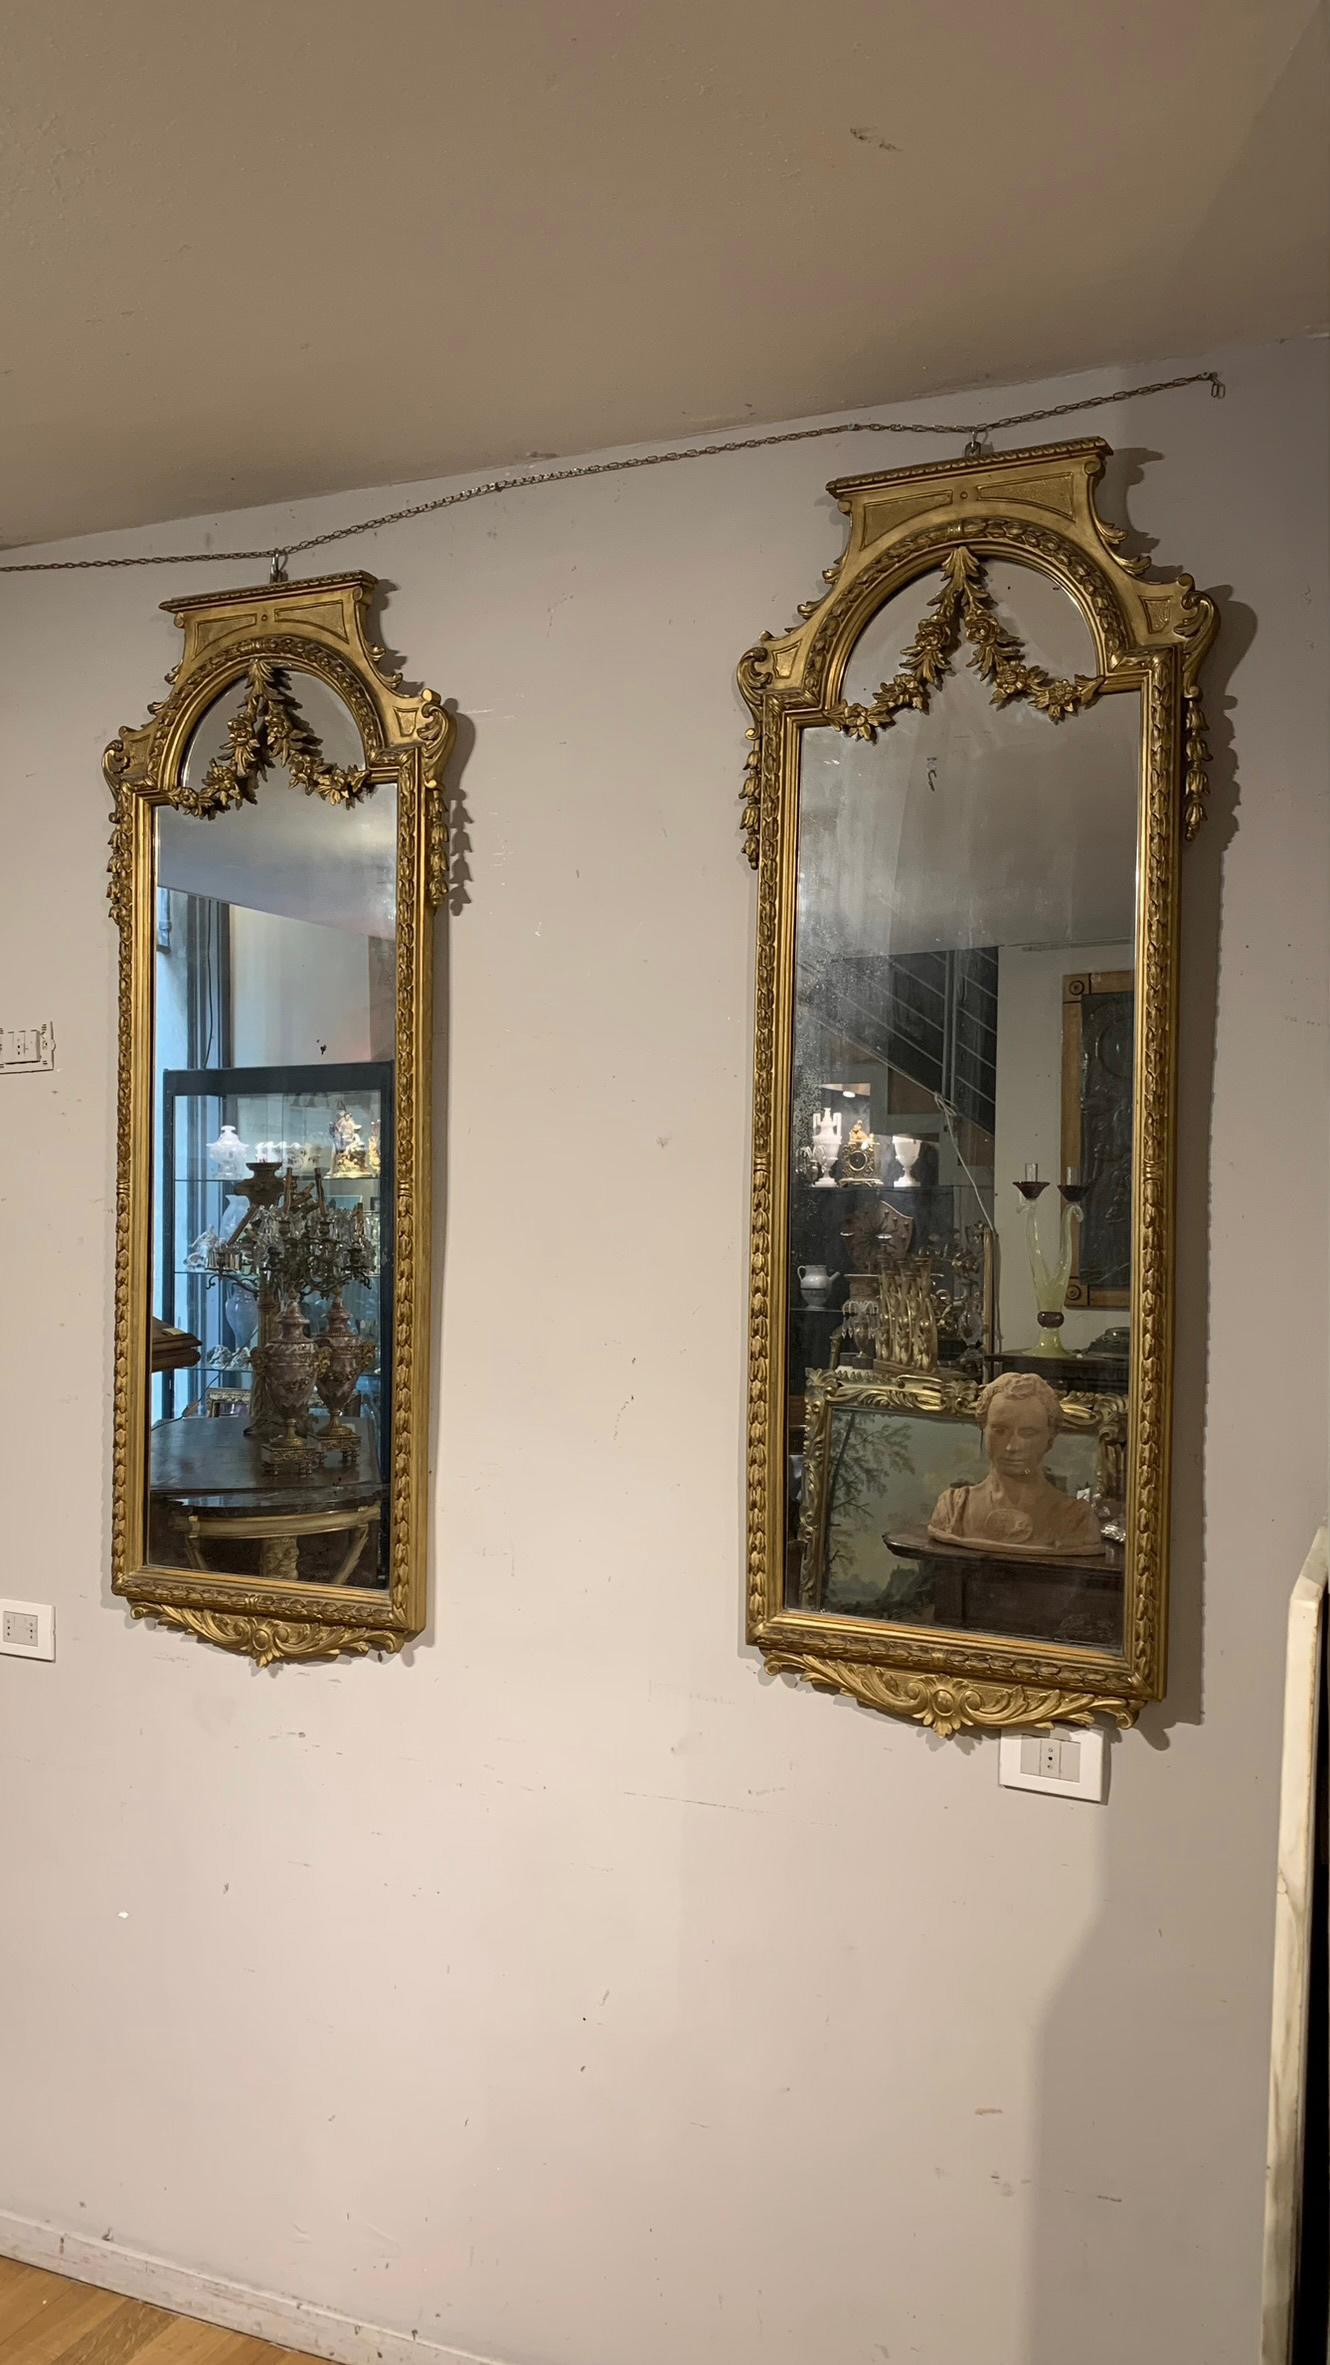 Splendid pair of mirrors in neoclassical style in carved and gilded wood with pure gold leaf. The mirrors are decorated with delicate vegetal racemes that extend up to the upper part, where they join in a decorative garland that also passes above